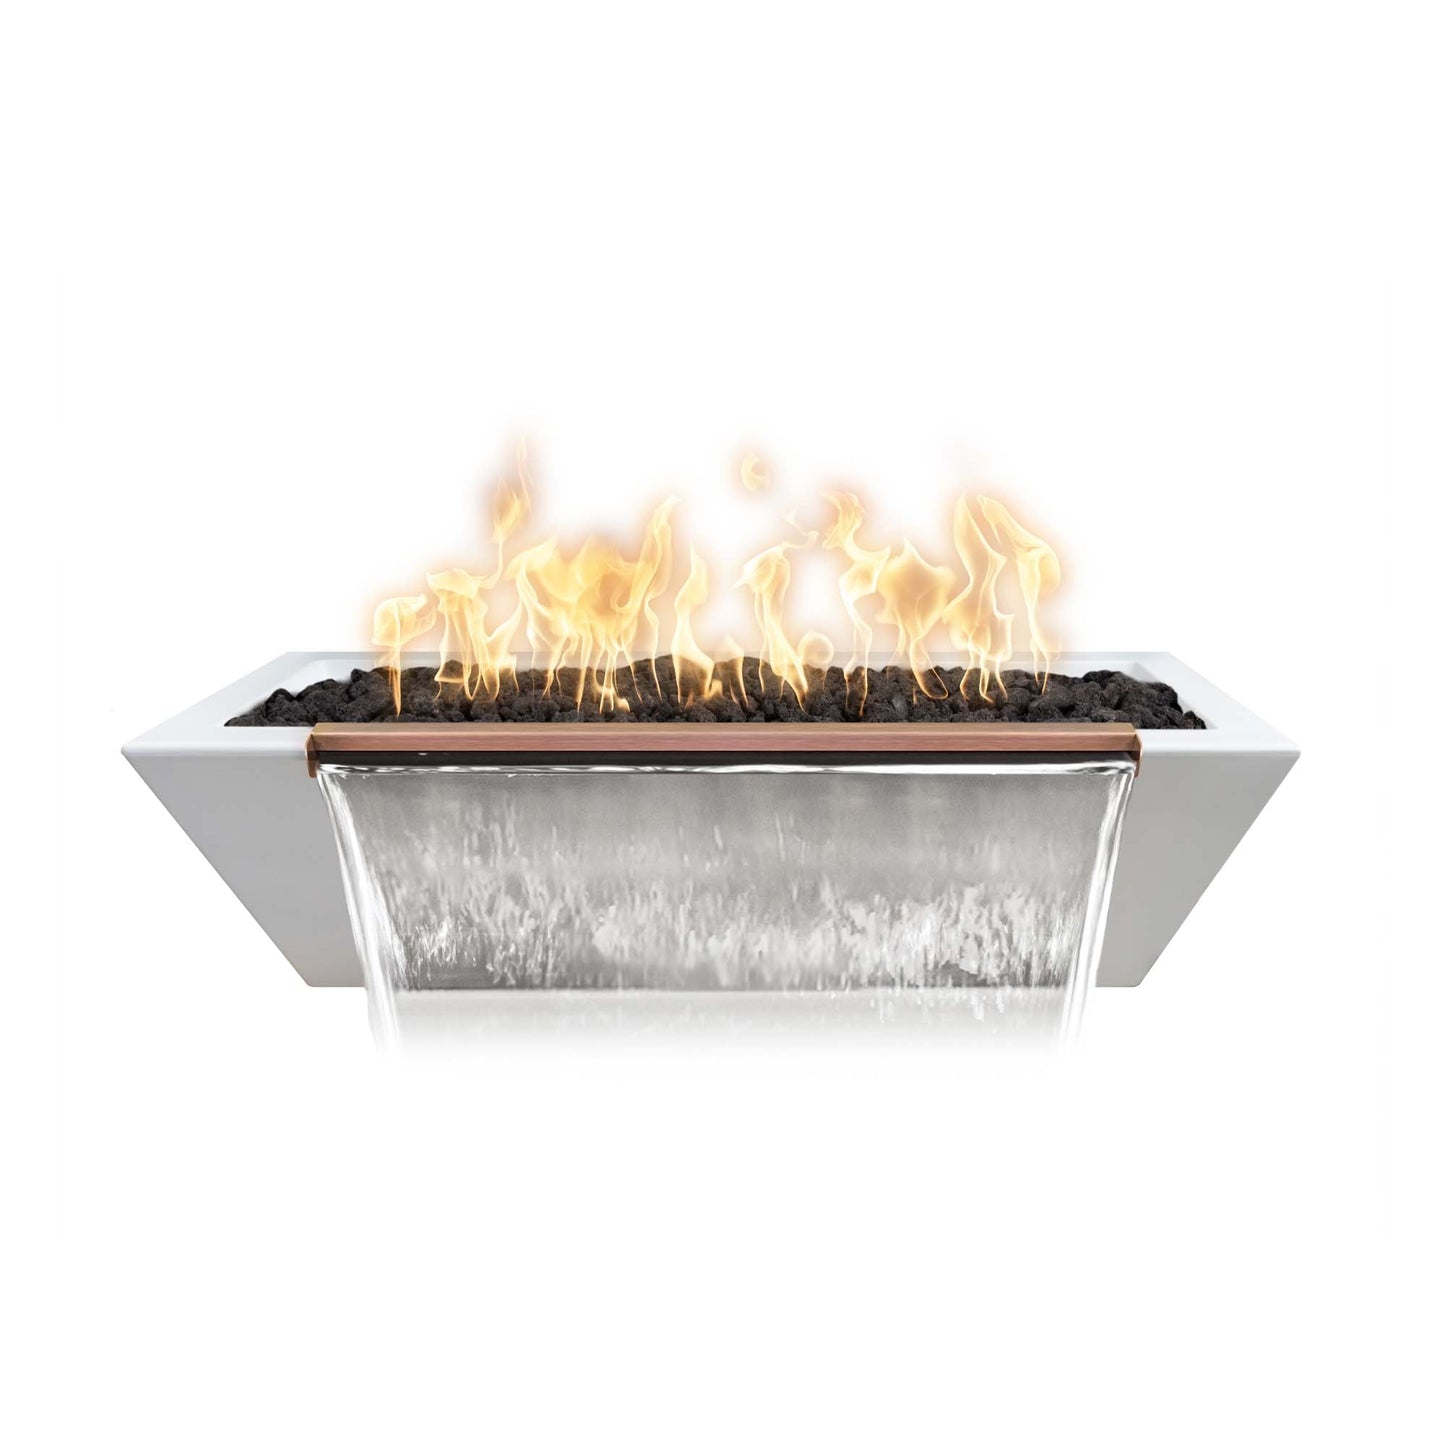 The Outdoor Plus Linear Maya 60" Brown GFRC Concrete Liquid Propane Fire & Water Bowl with Match Lit Ignition